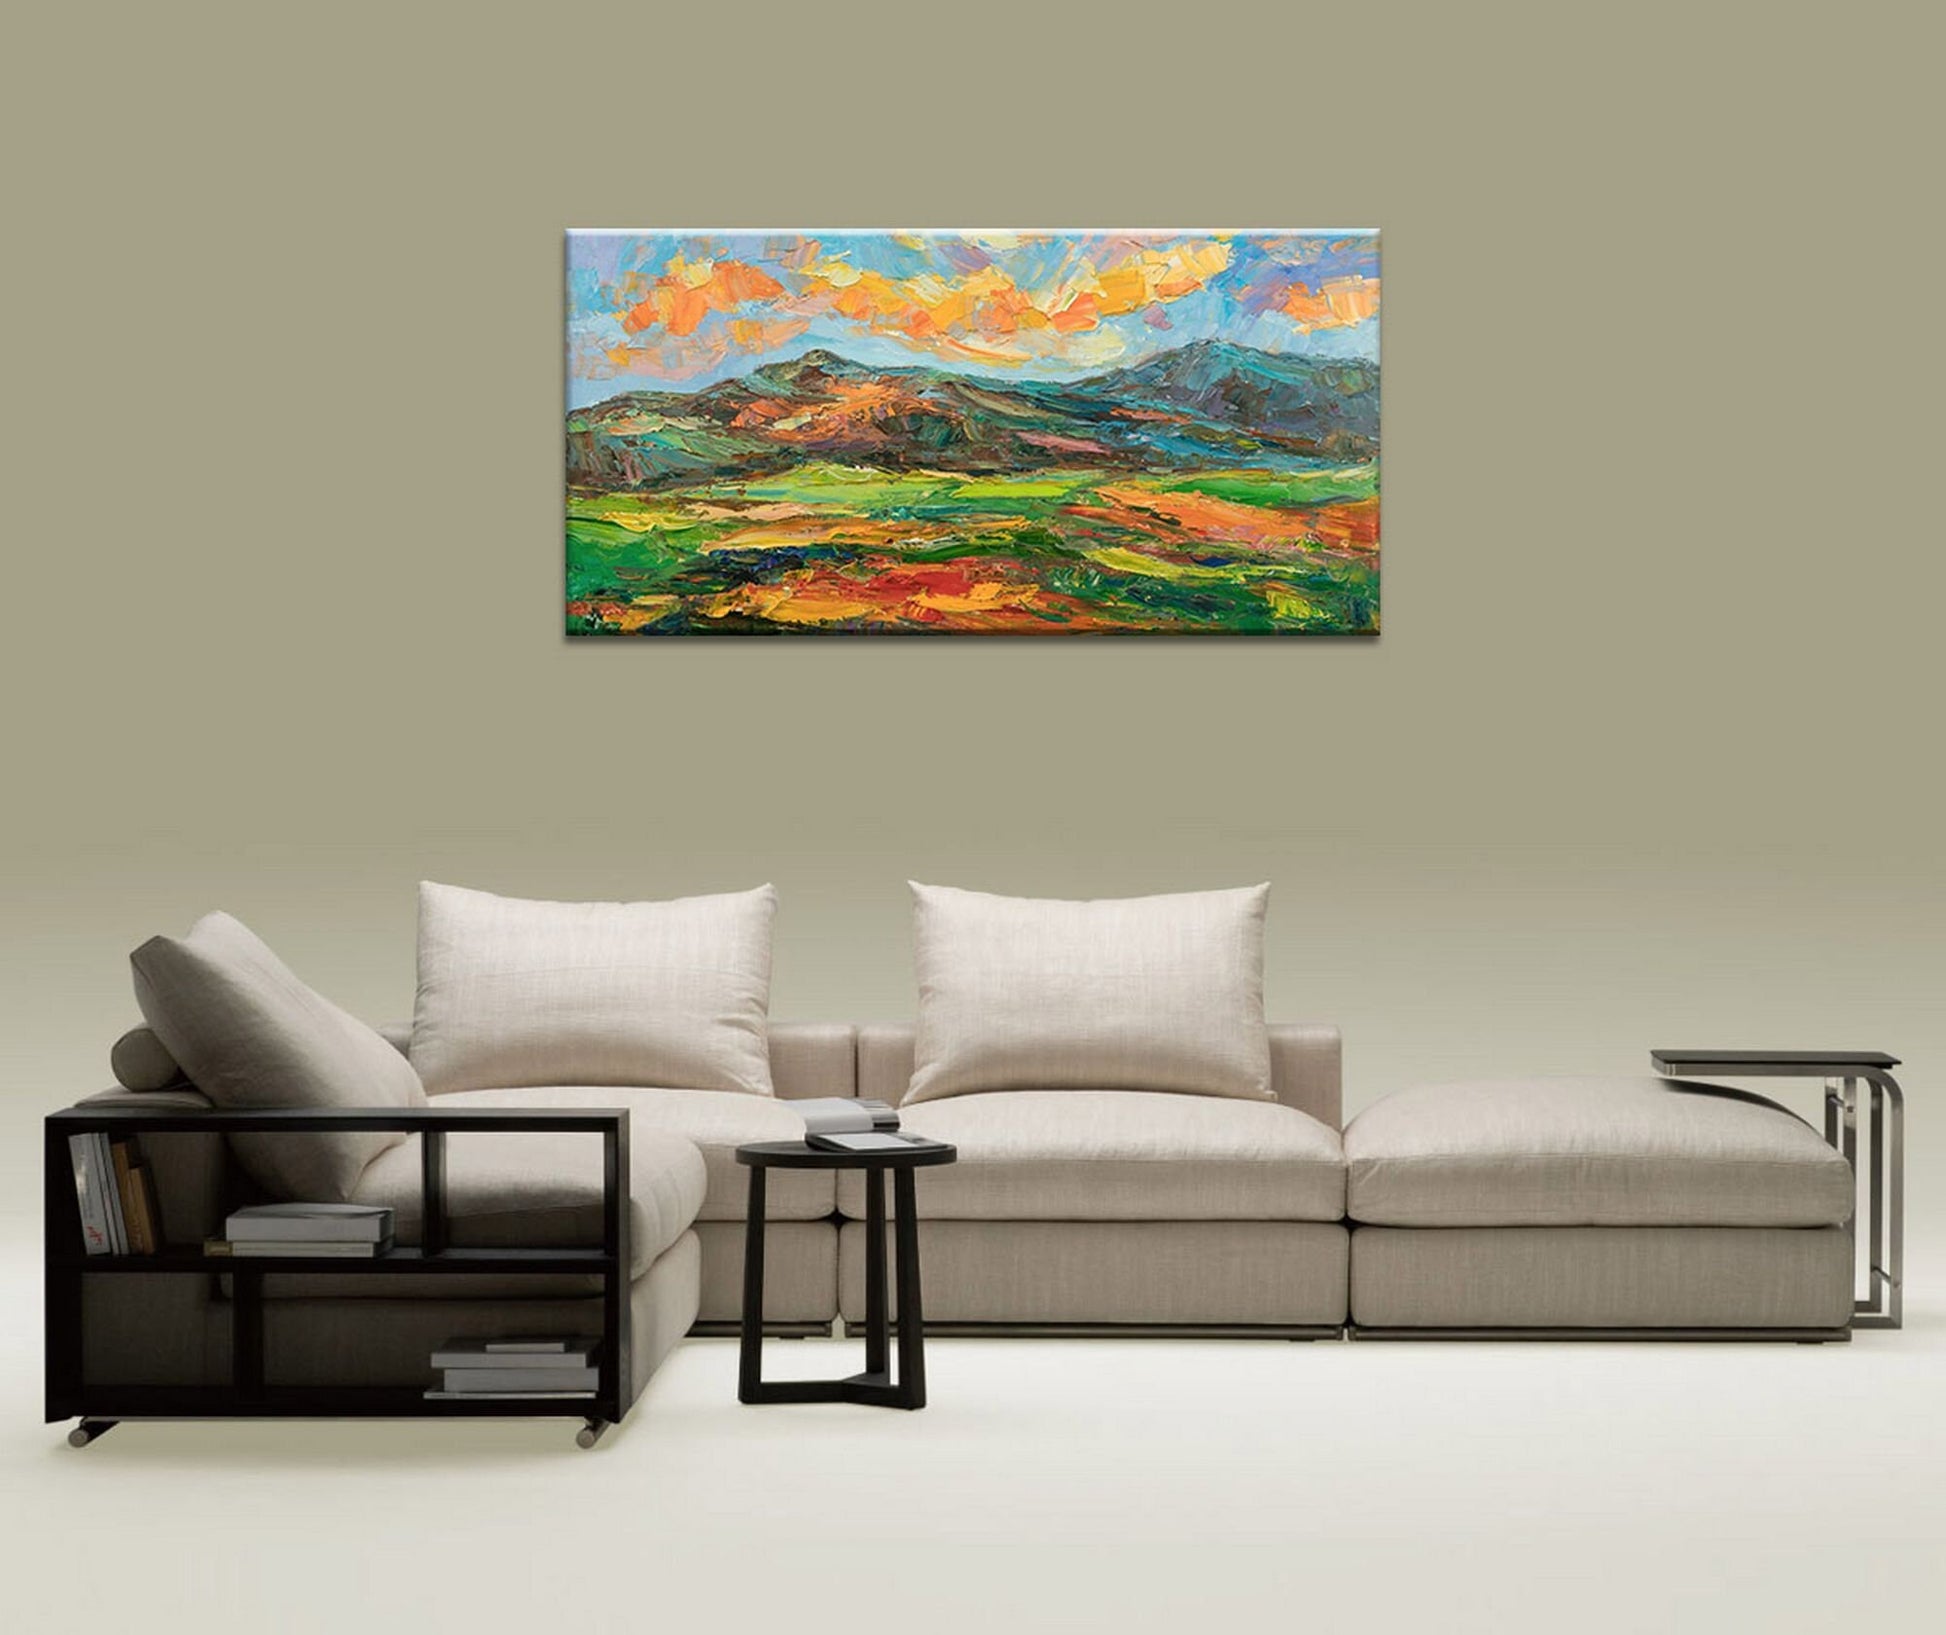 Abstract Painting, Large Wall Art Canvas, Oil Painting Landscape, Contemporary Painting, Wall Decor, Canvas Painting, Original Abstract Art